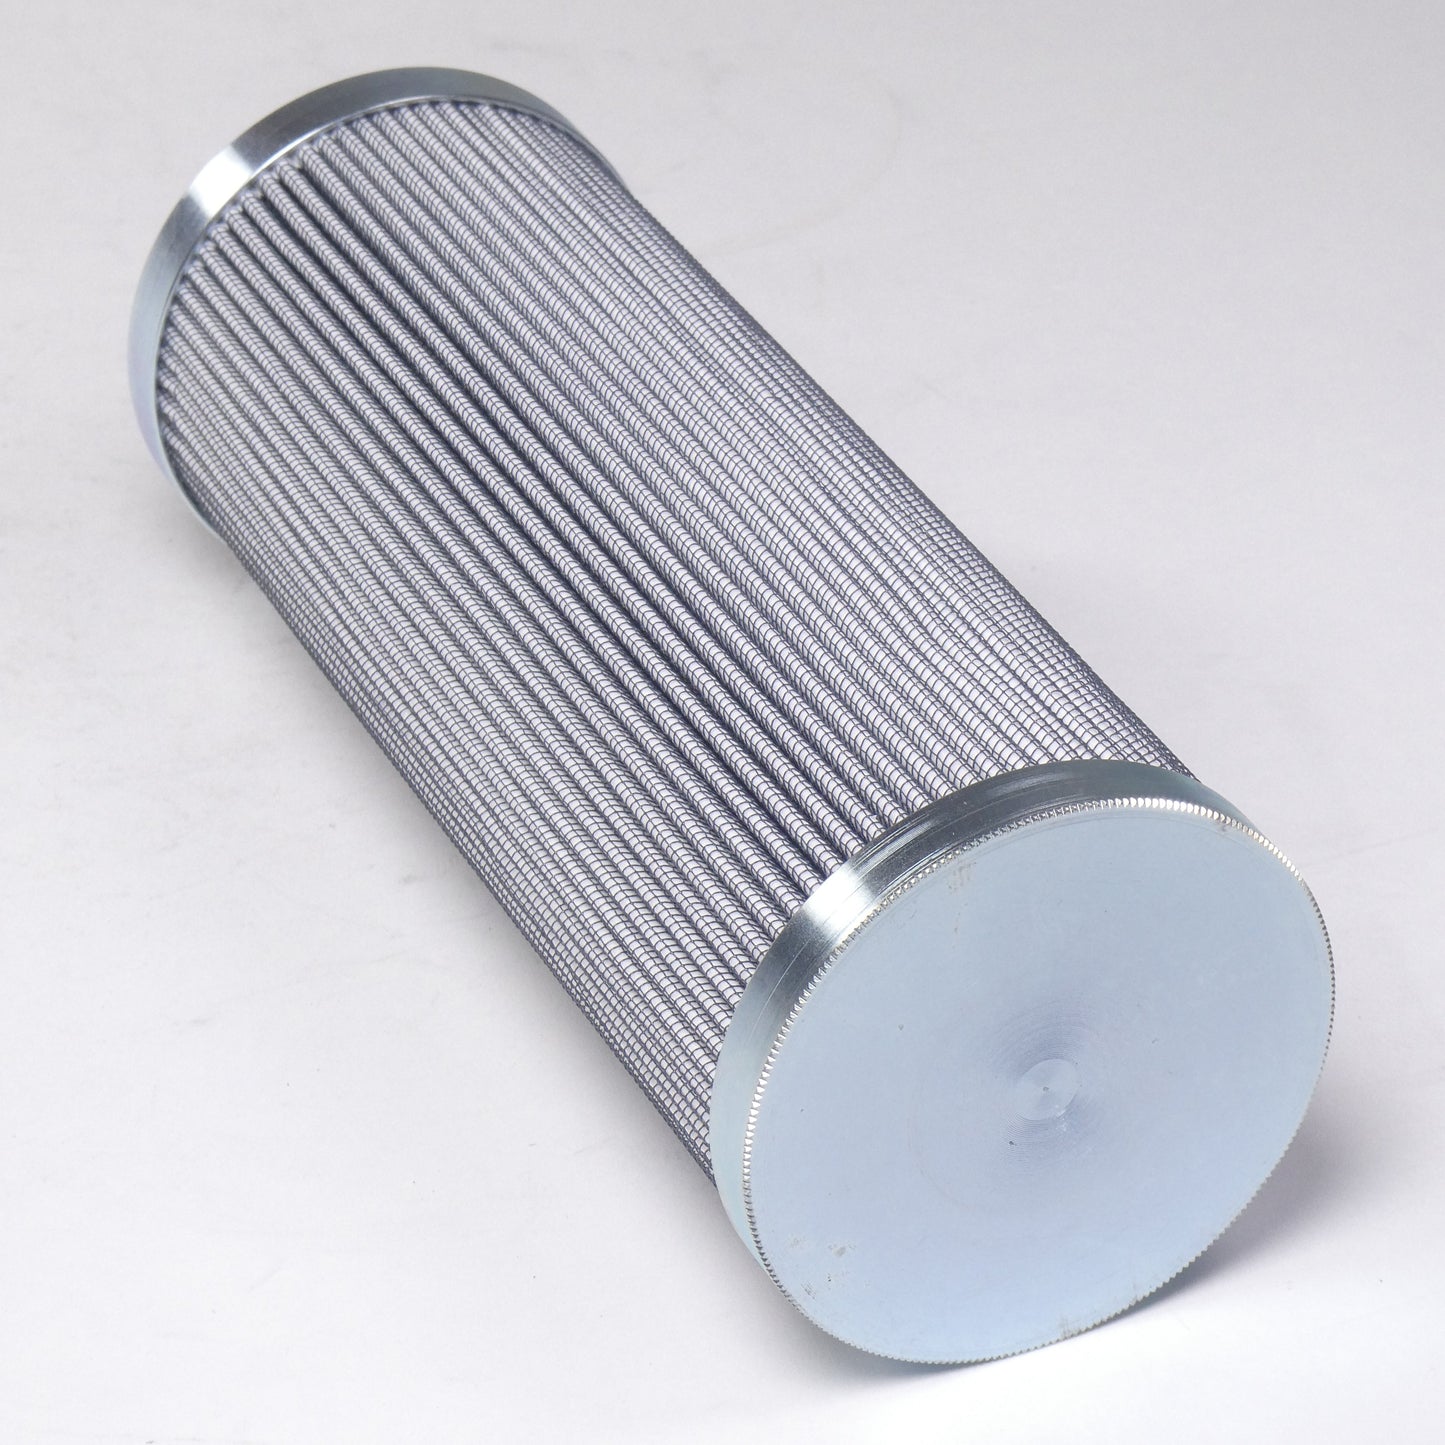 Hydrafil Replacement Filter Element for Filtersoft H9608MAAVH